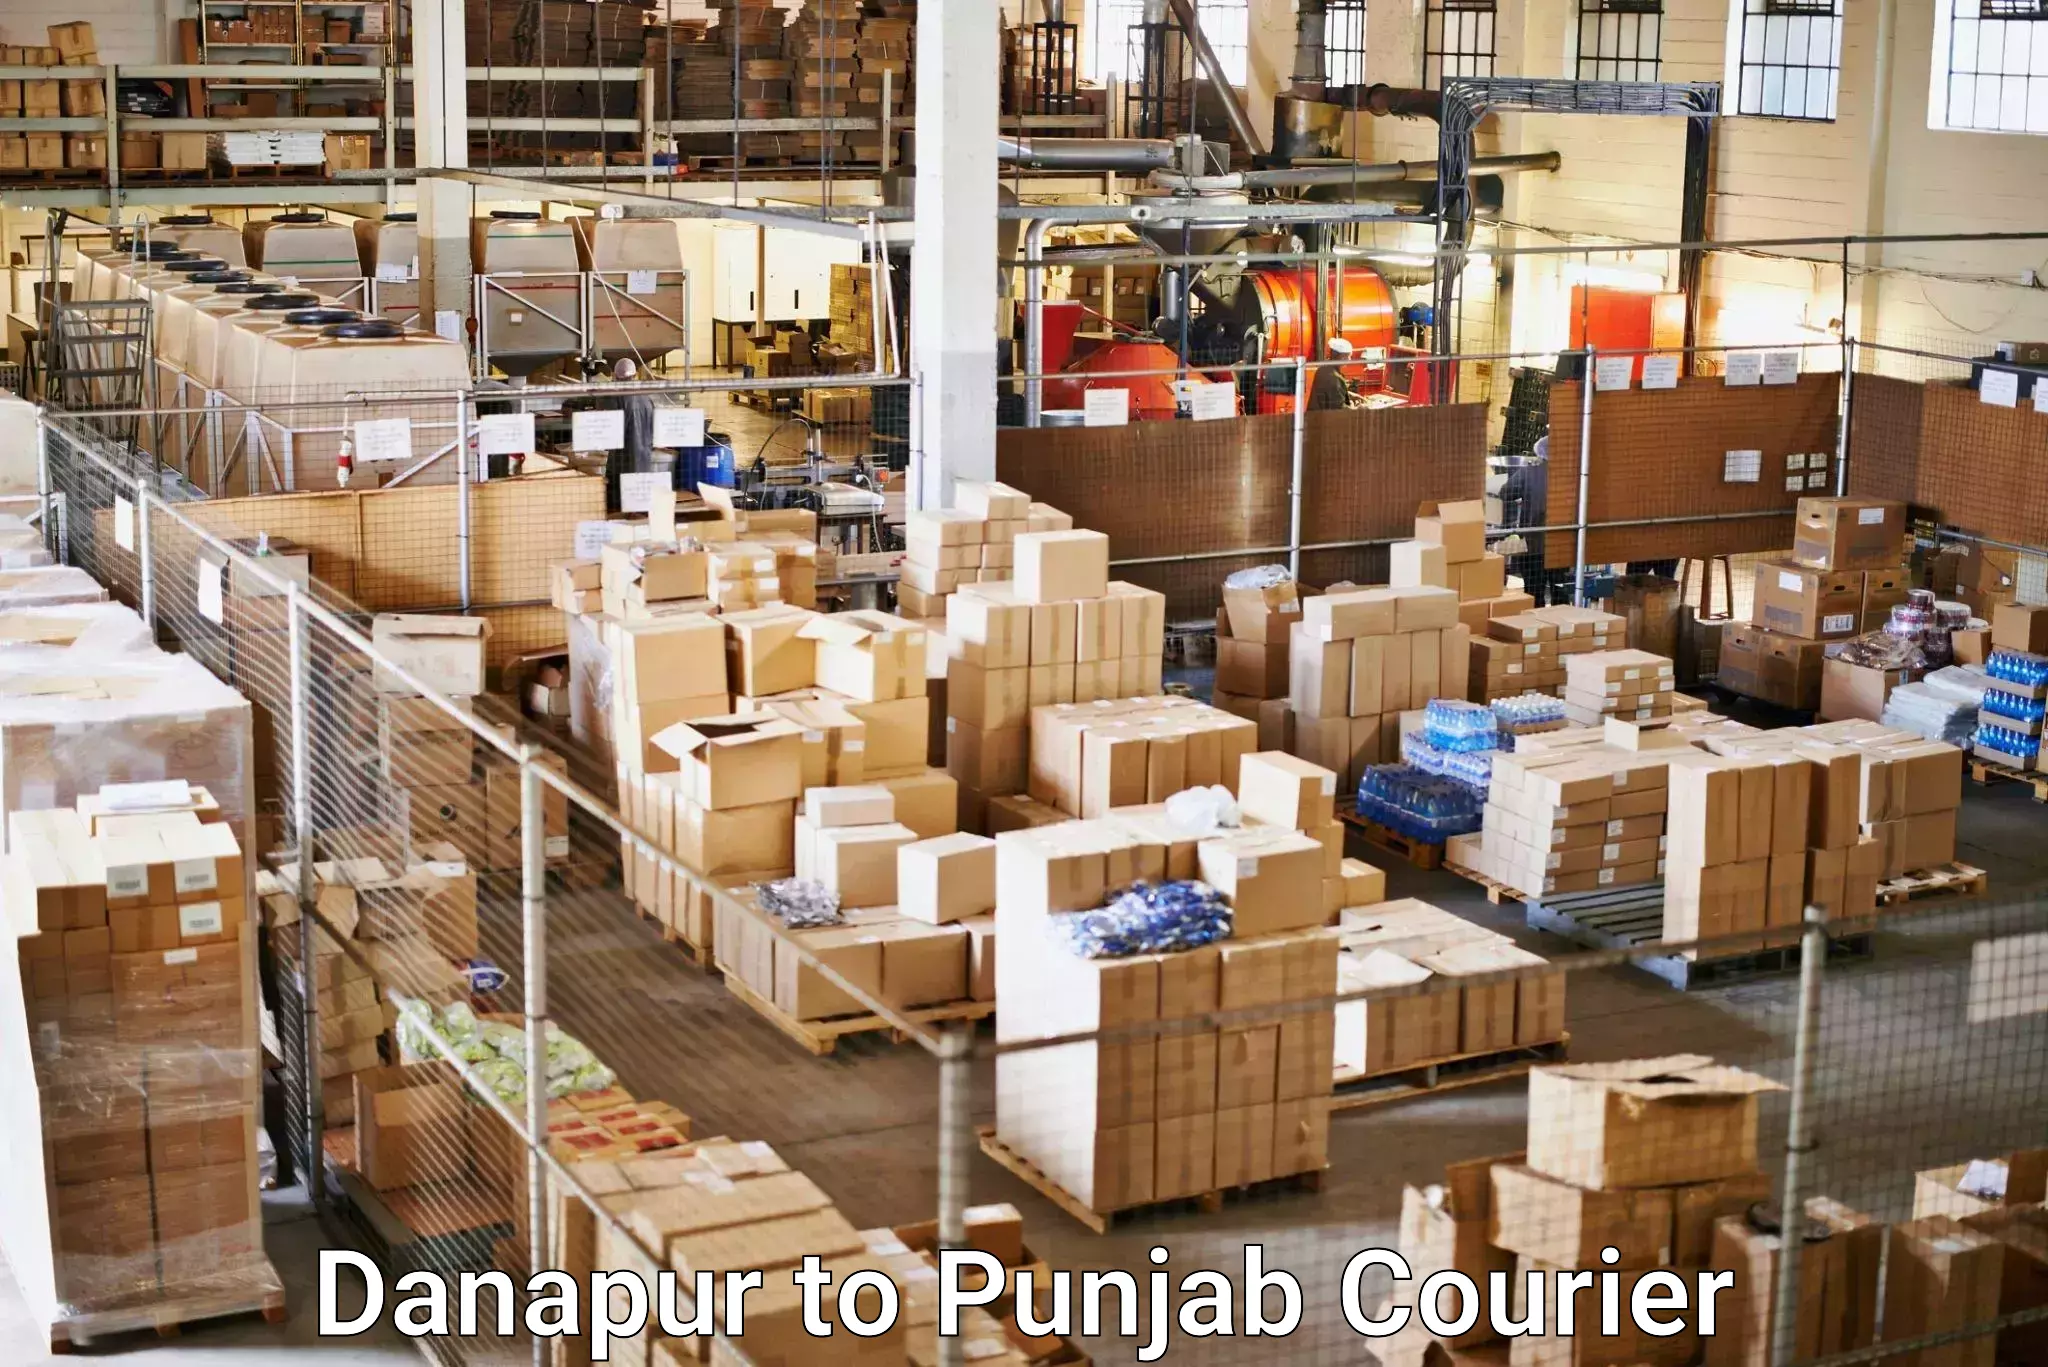 Nationwide delivery network Danapur to Nawanshahr